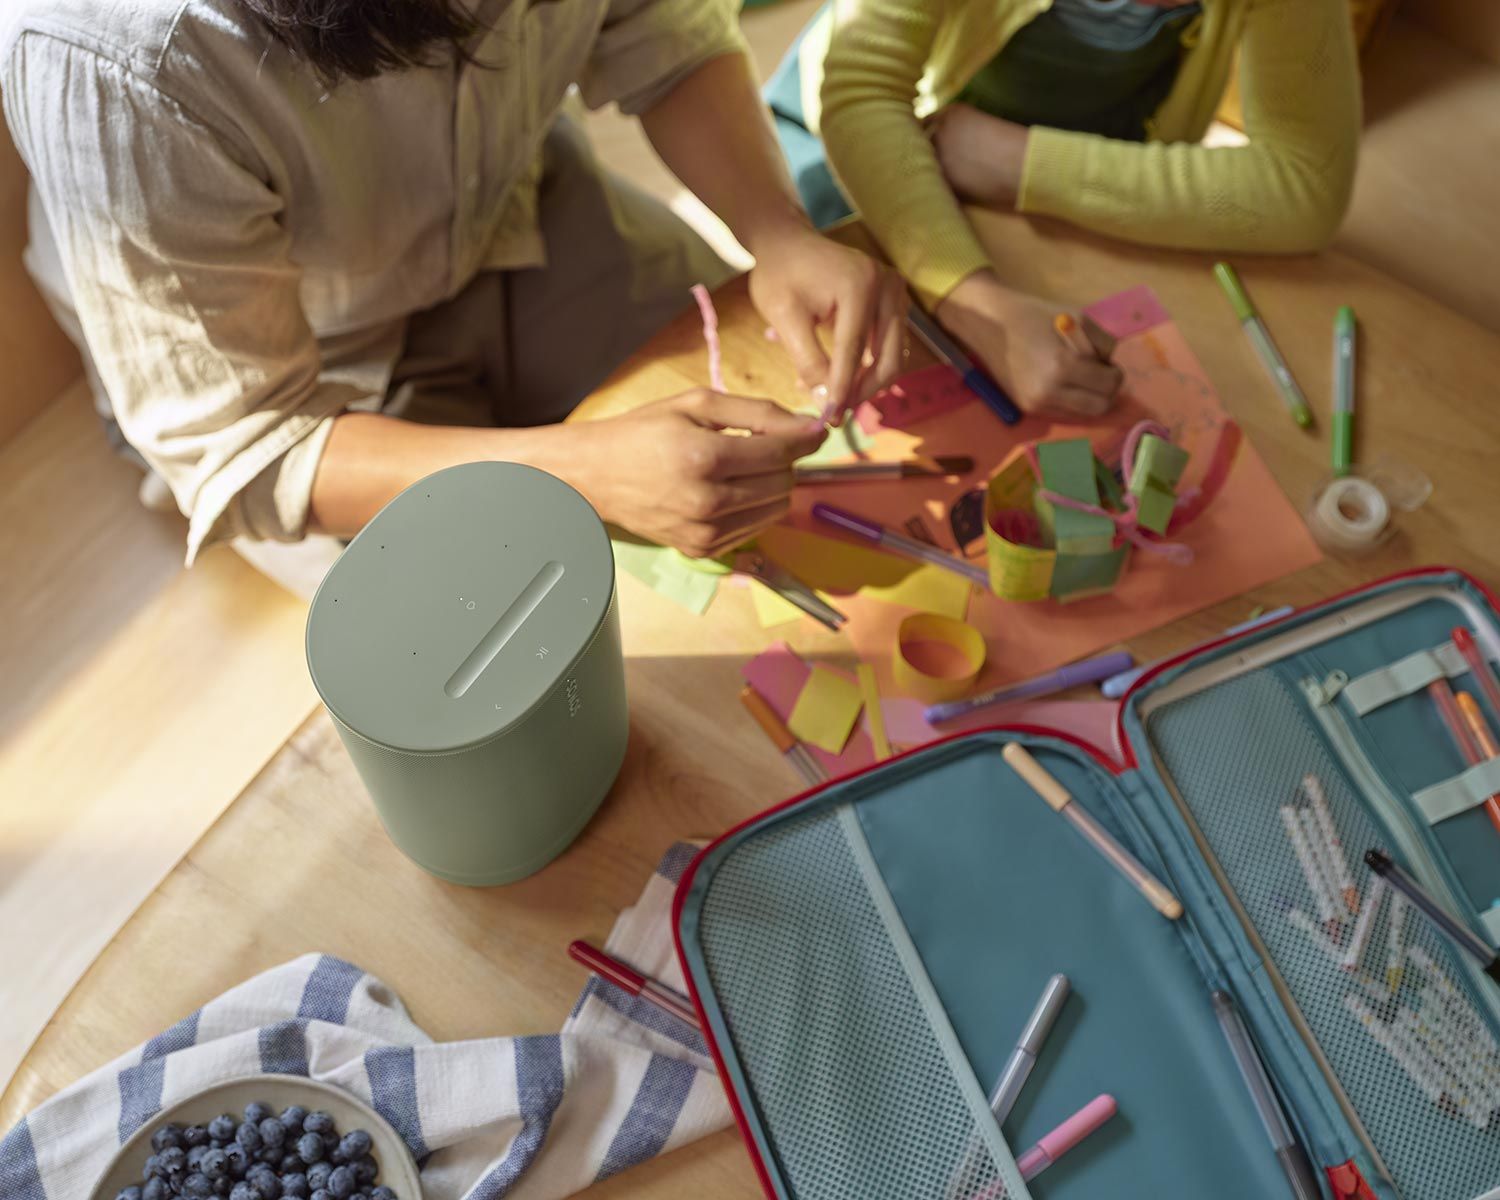 A person and a child doing arts and crafts on a table, with a green Sonos speaker nearby.